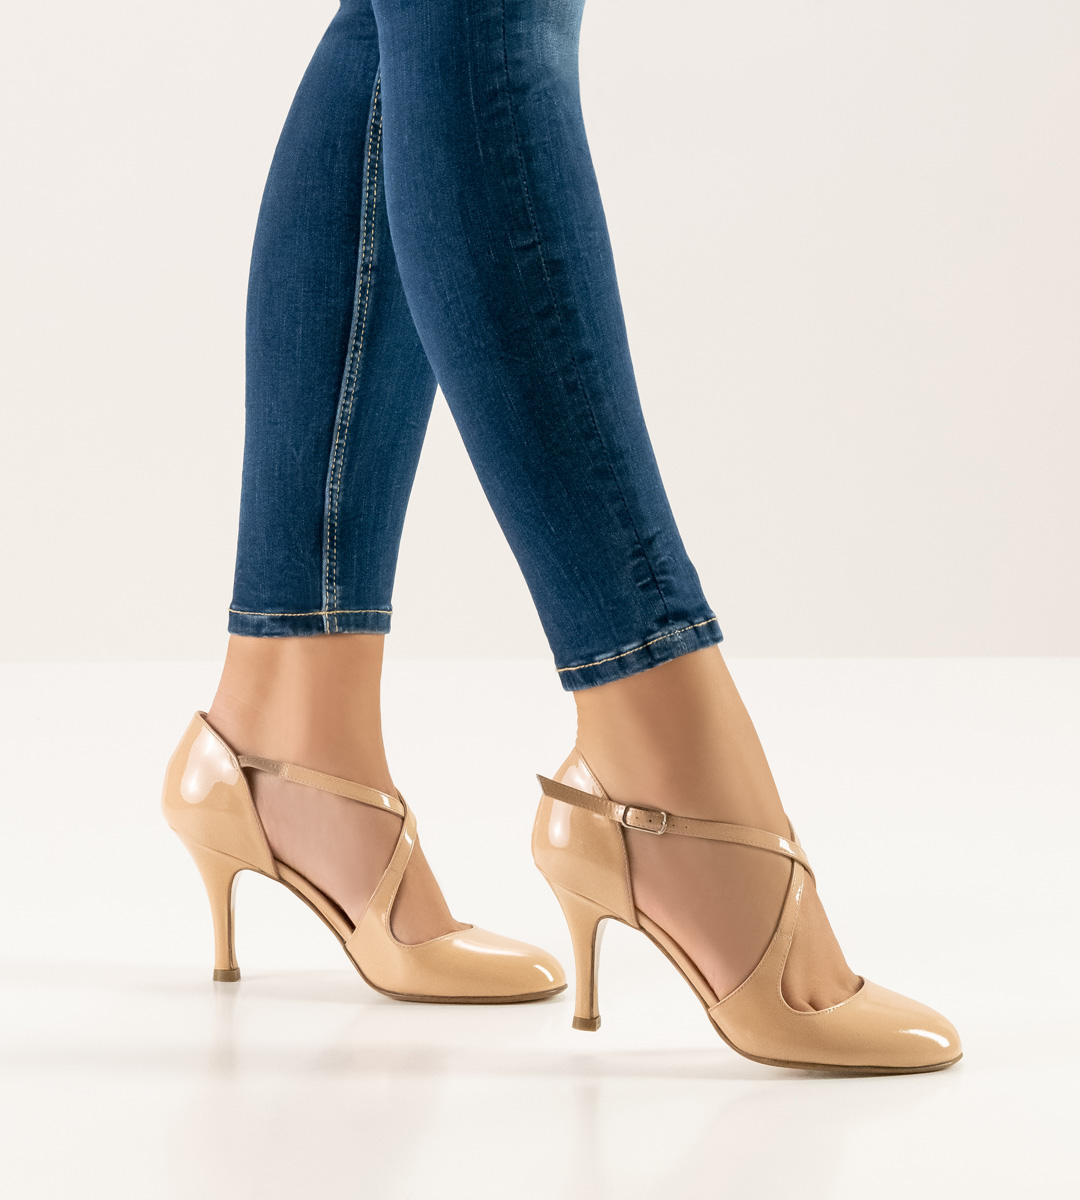 Blue jeans in combination with beige Nueva Epoca women's dance shoe with leather sole